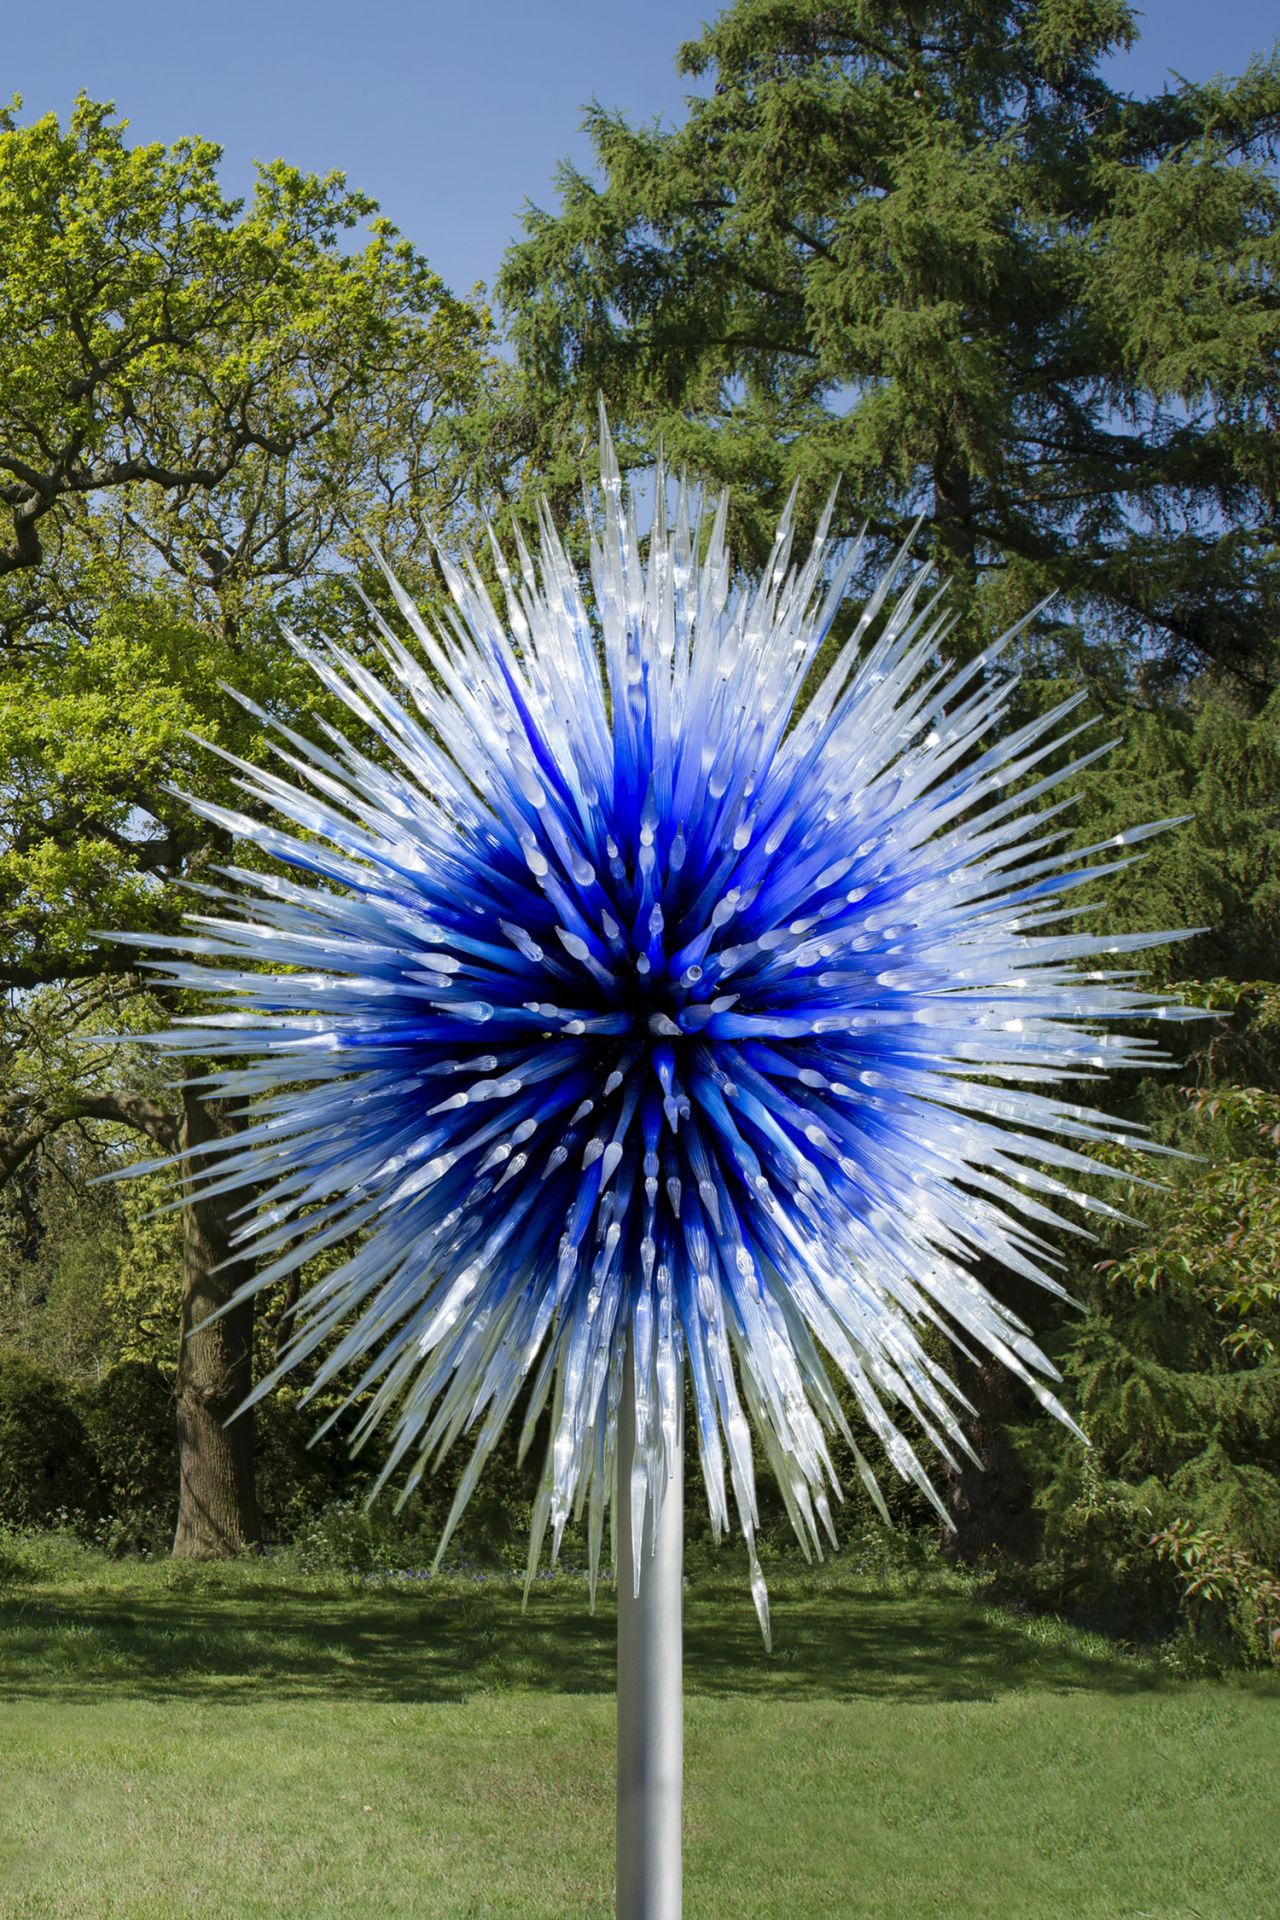 Sapphire Star, 2010. Dale Chihuly © Chihuly Studios